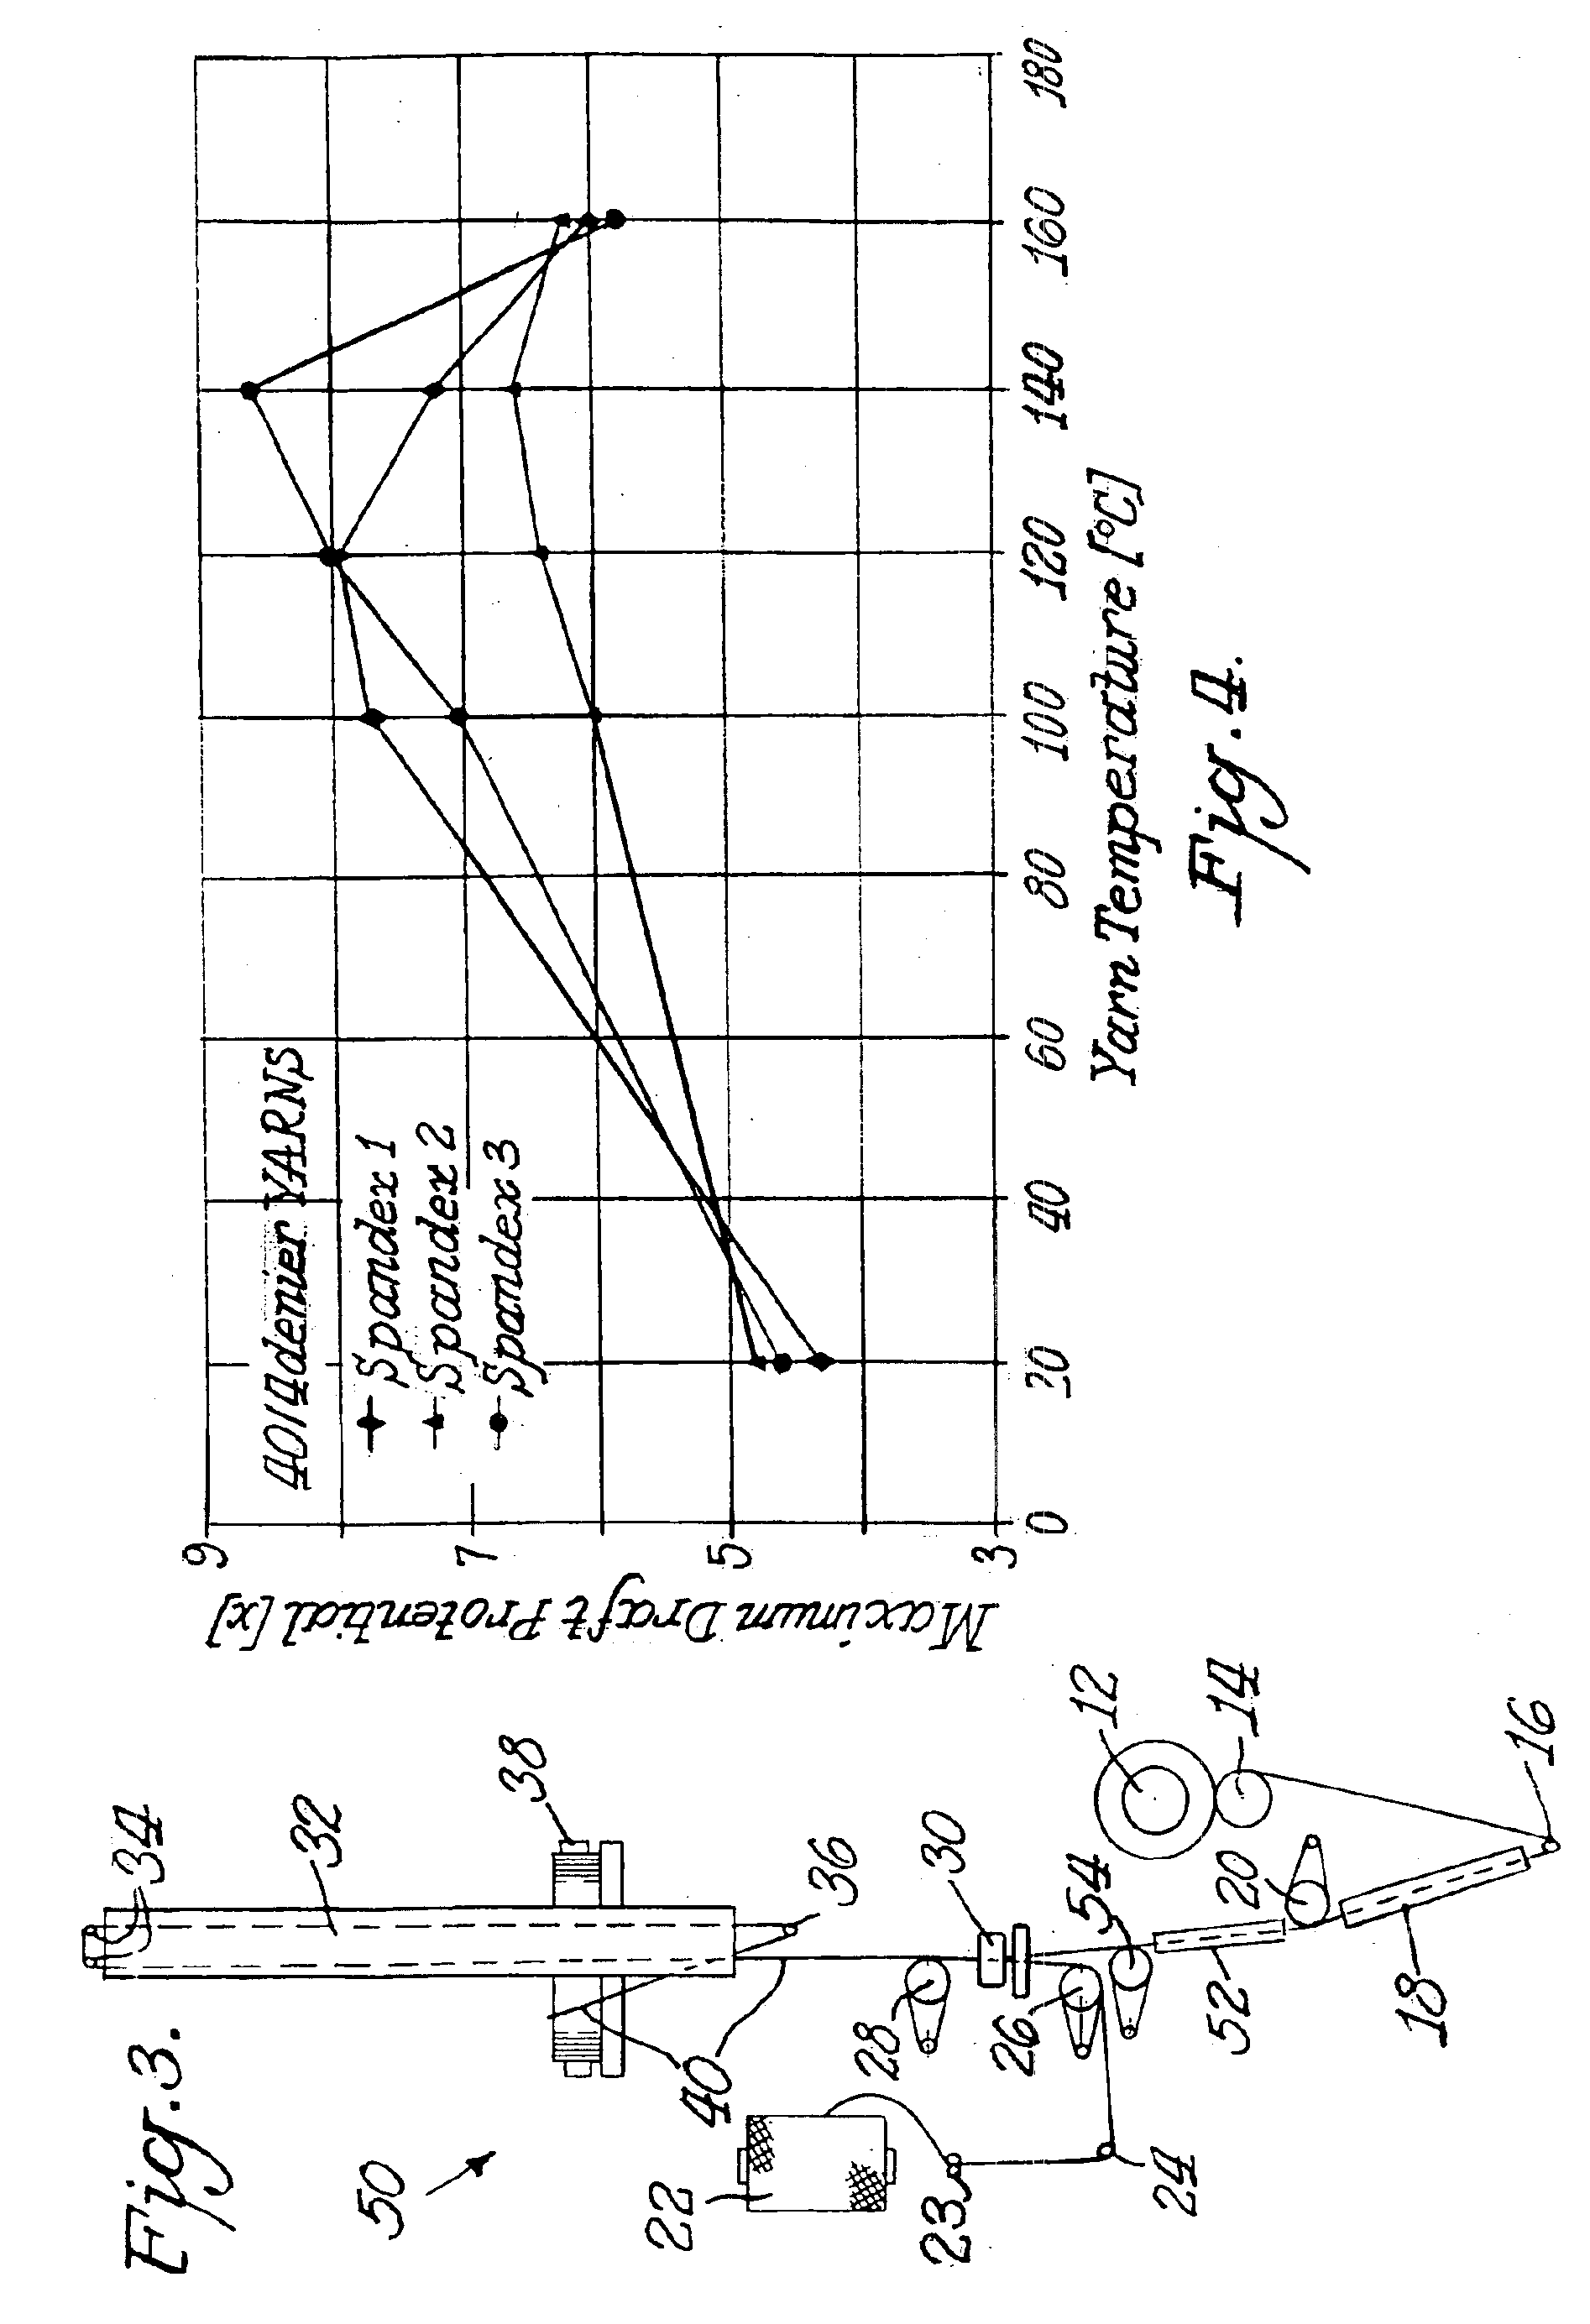 Air-jet method for producing composite elastic yarns